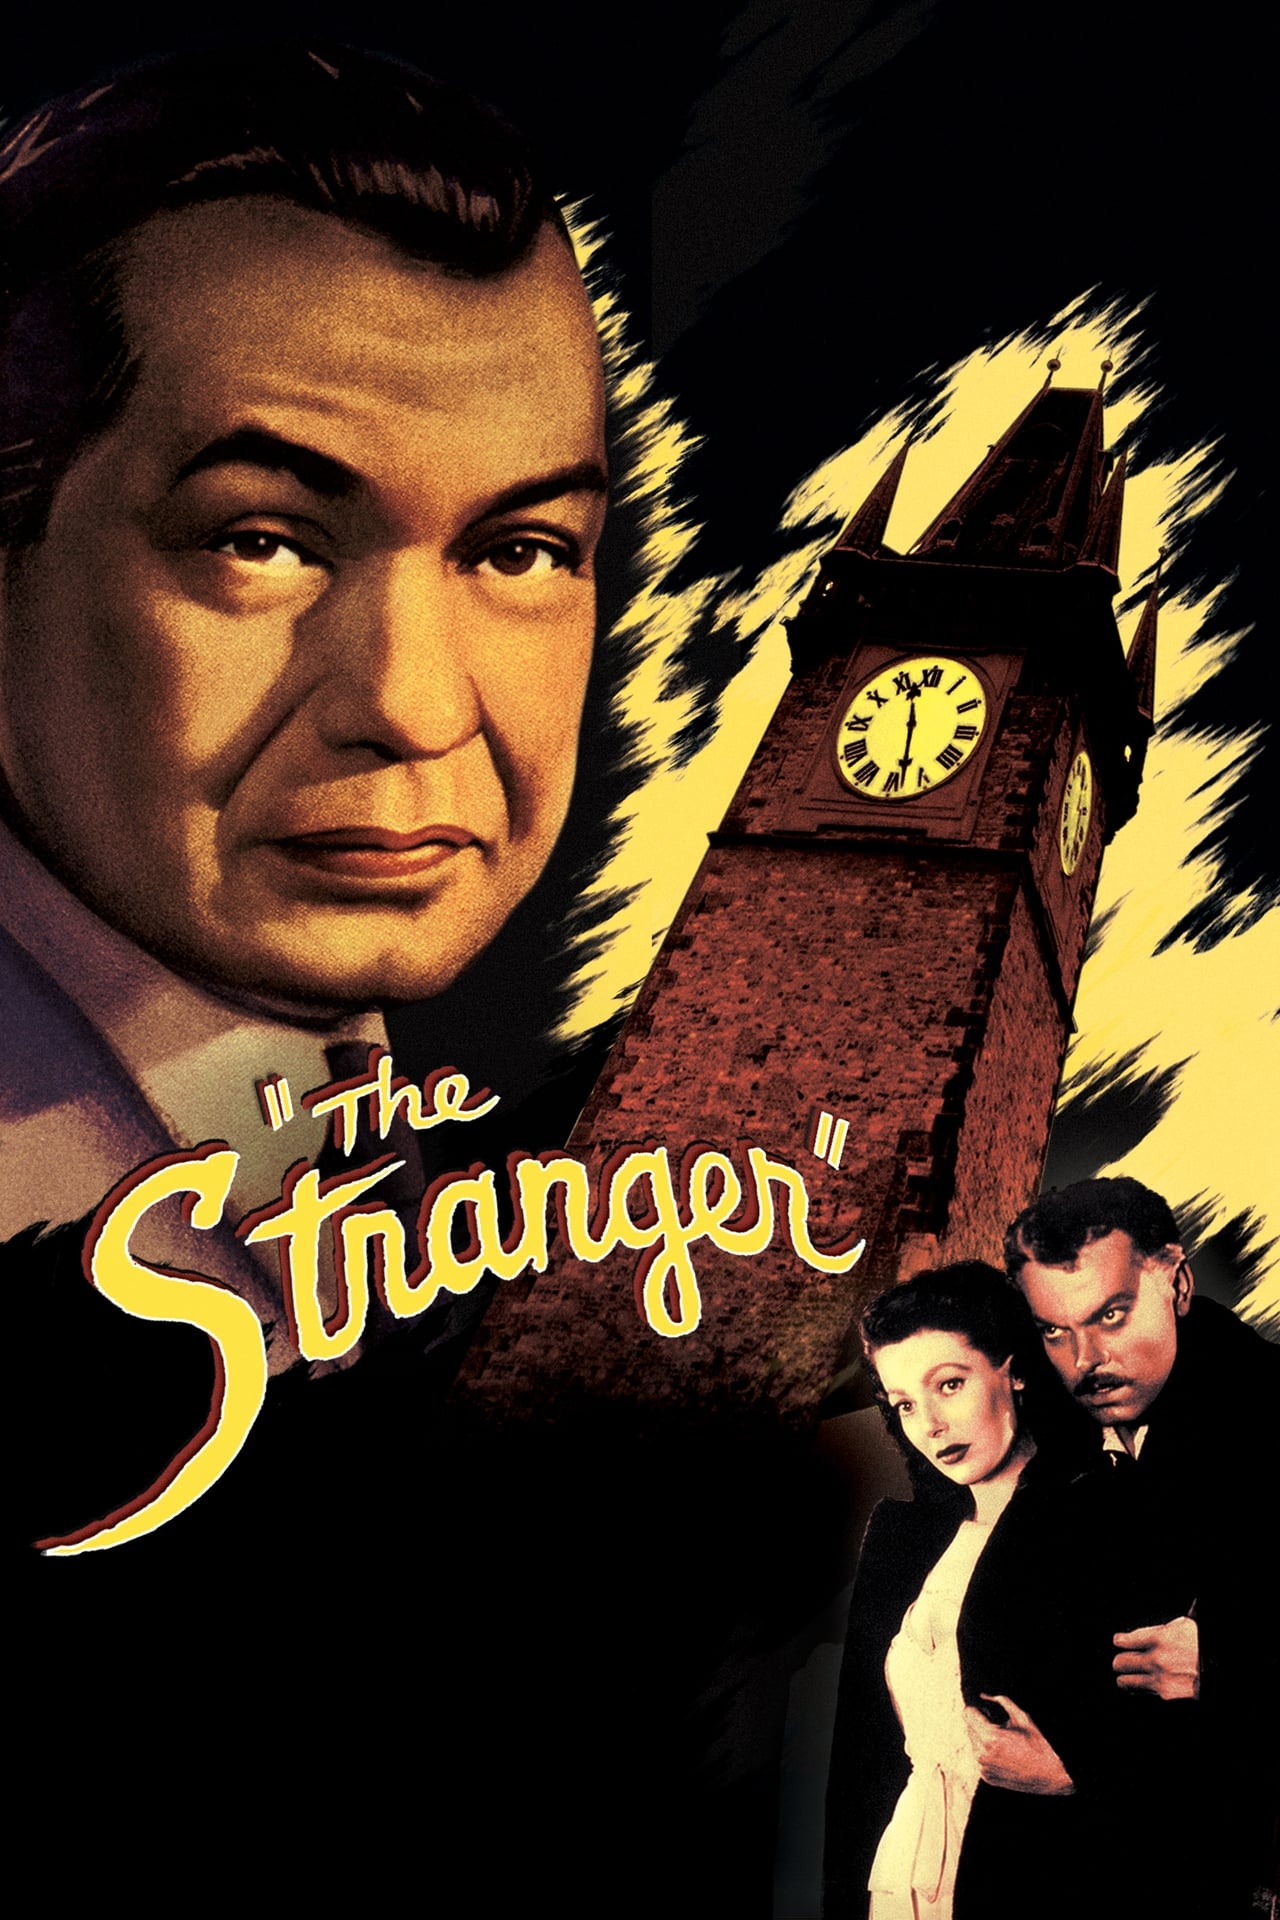 The Stranger (2010) wiki, synopsis, reviews, watch and download